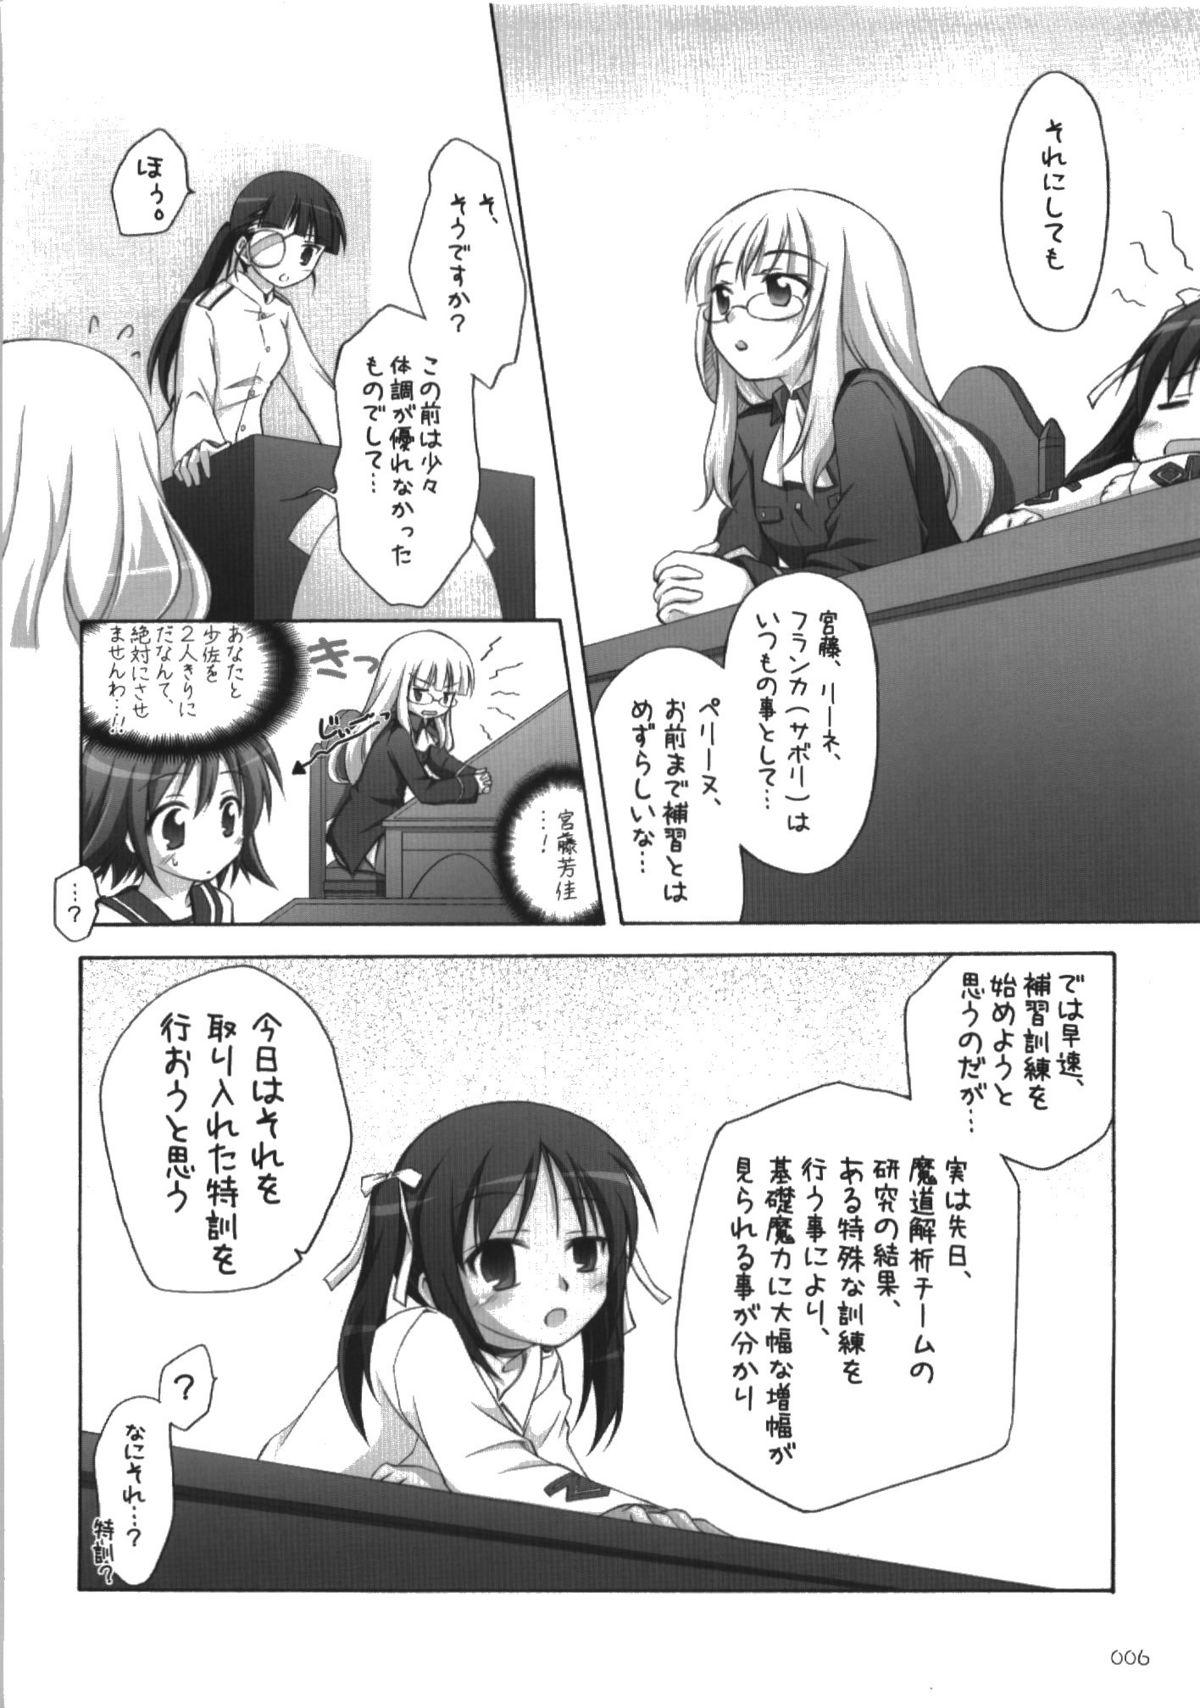 Big breasts s.n.e.g? - Strike witches Tiny Titties - Page 6